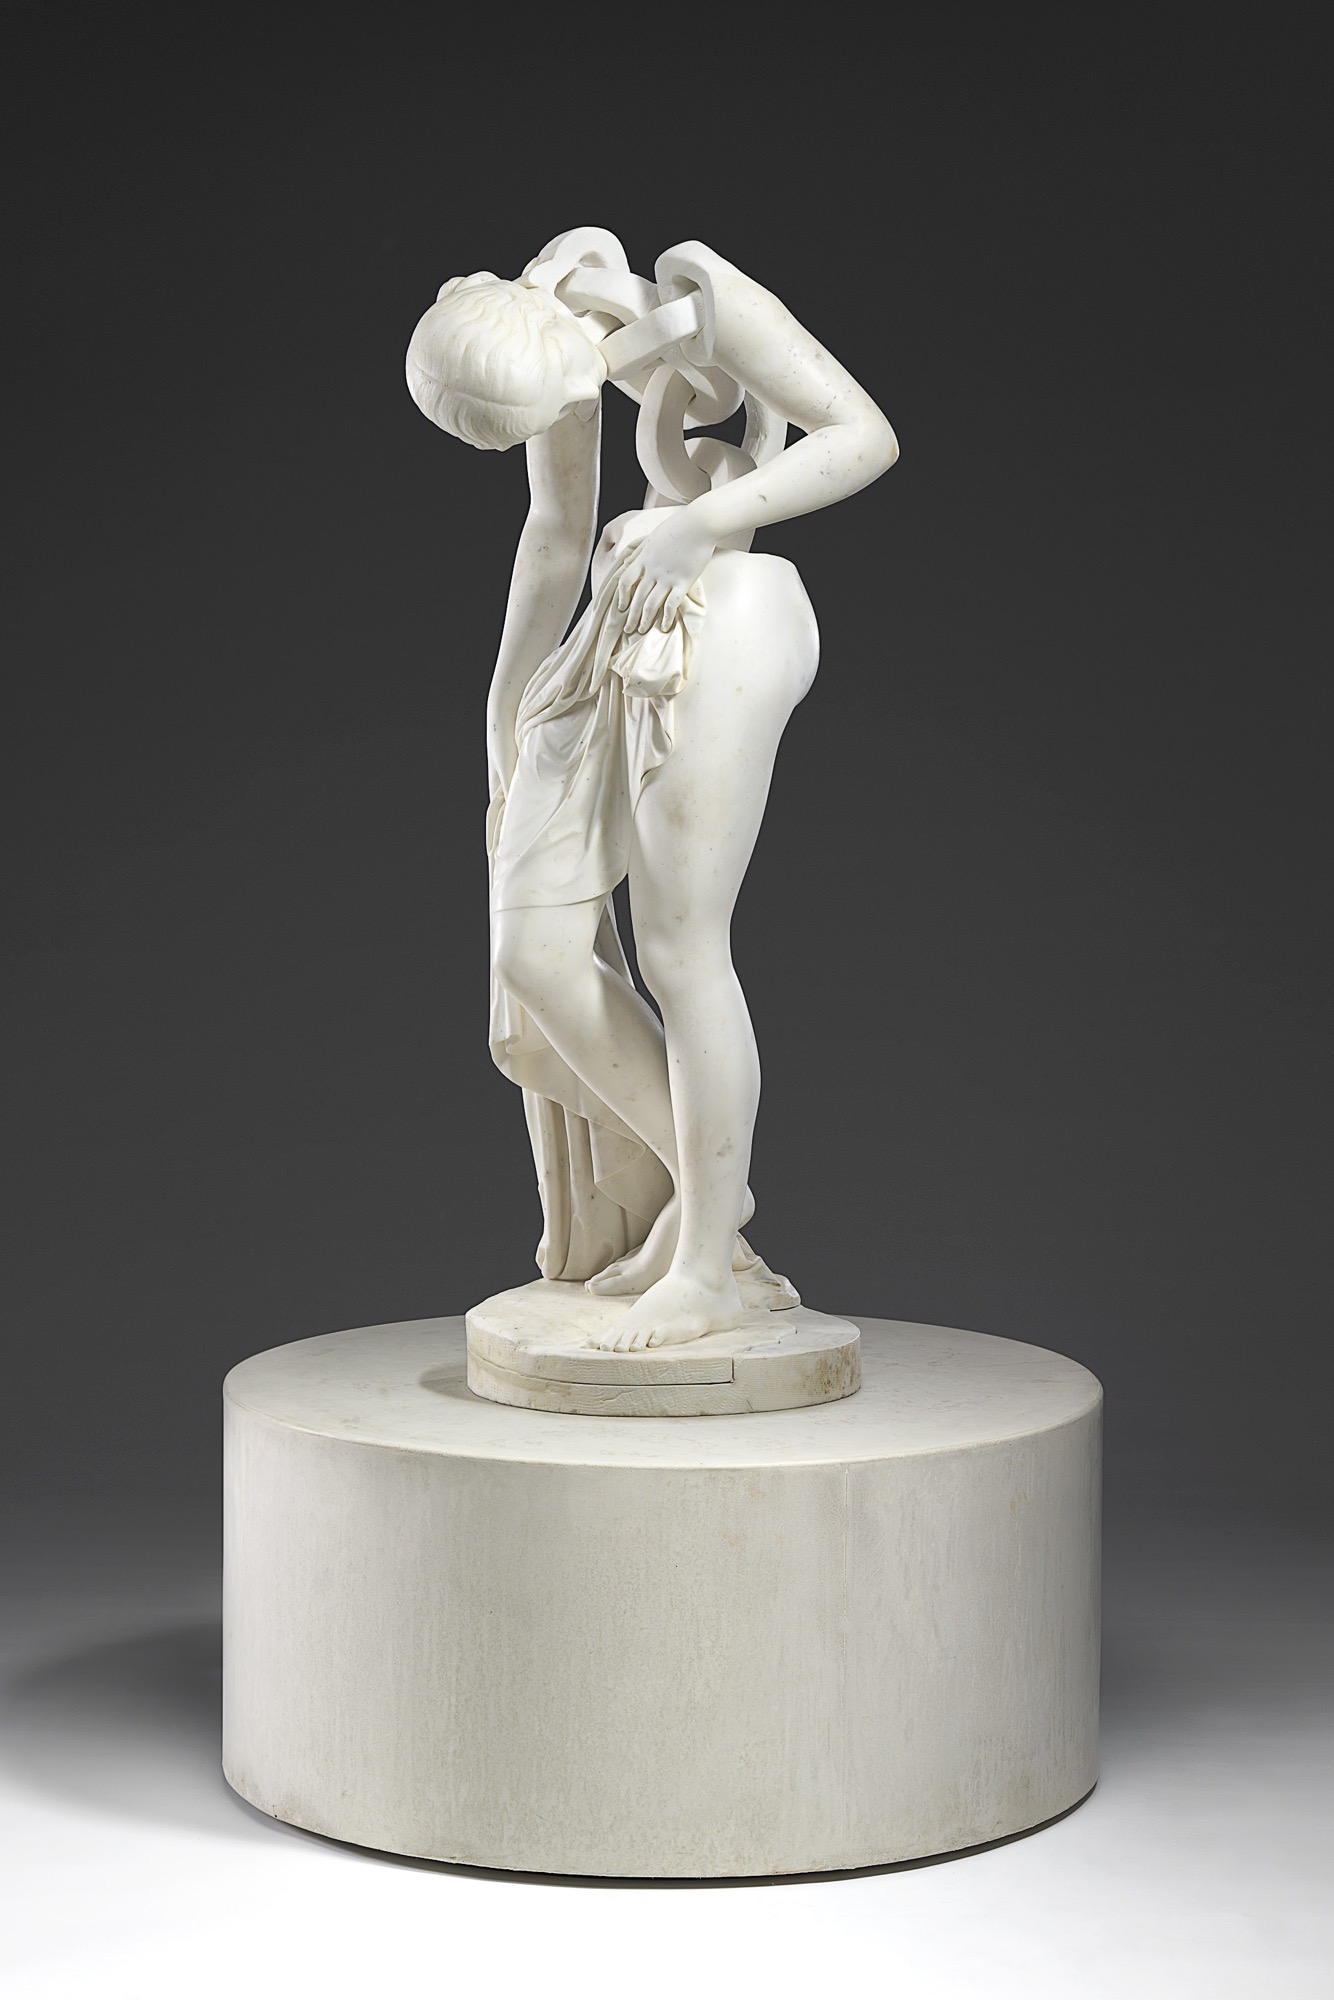 Jonathan Owen, <em>Untitled</em> (2016), marble. National Gallery of Victoria, Melbourne. Purchased, NGV Supporters of Contemporary Art, Ruth Margaret Frances Houghton Bequest and NGV Foundation Patrons, 2017. © Courtesy the Artist and Ingleby, Edinburgh.